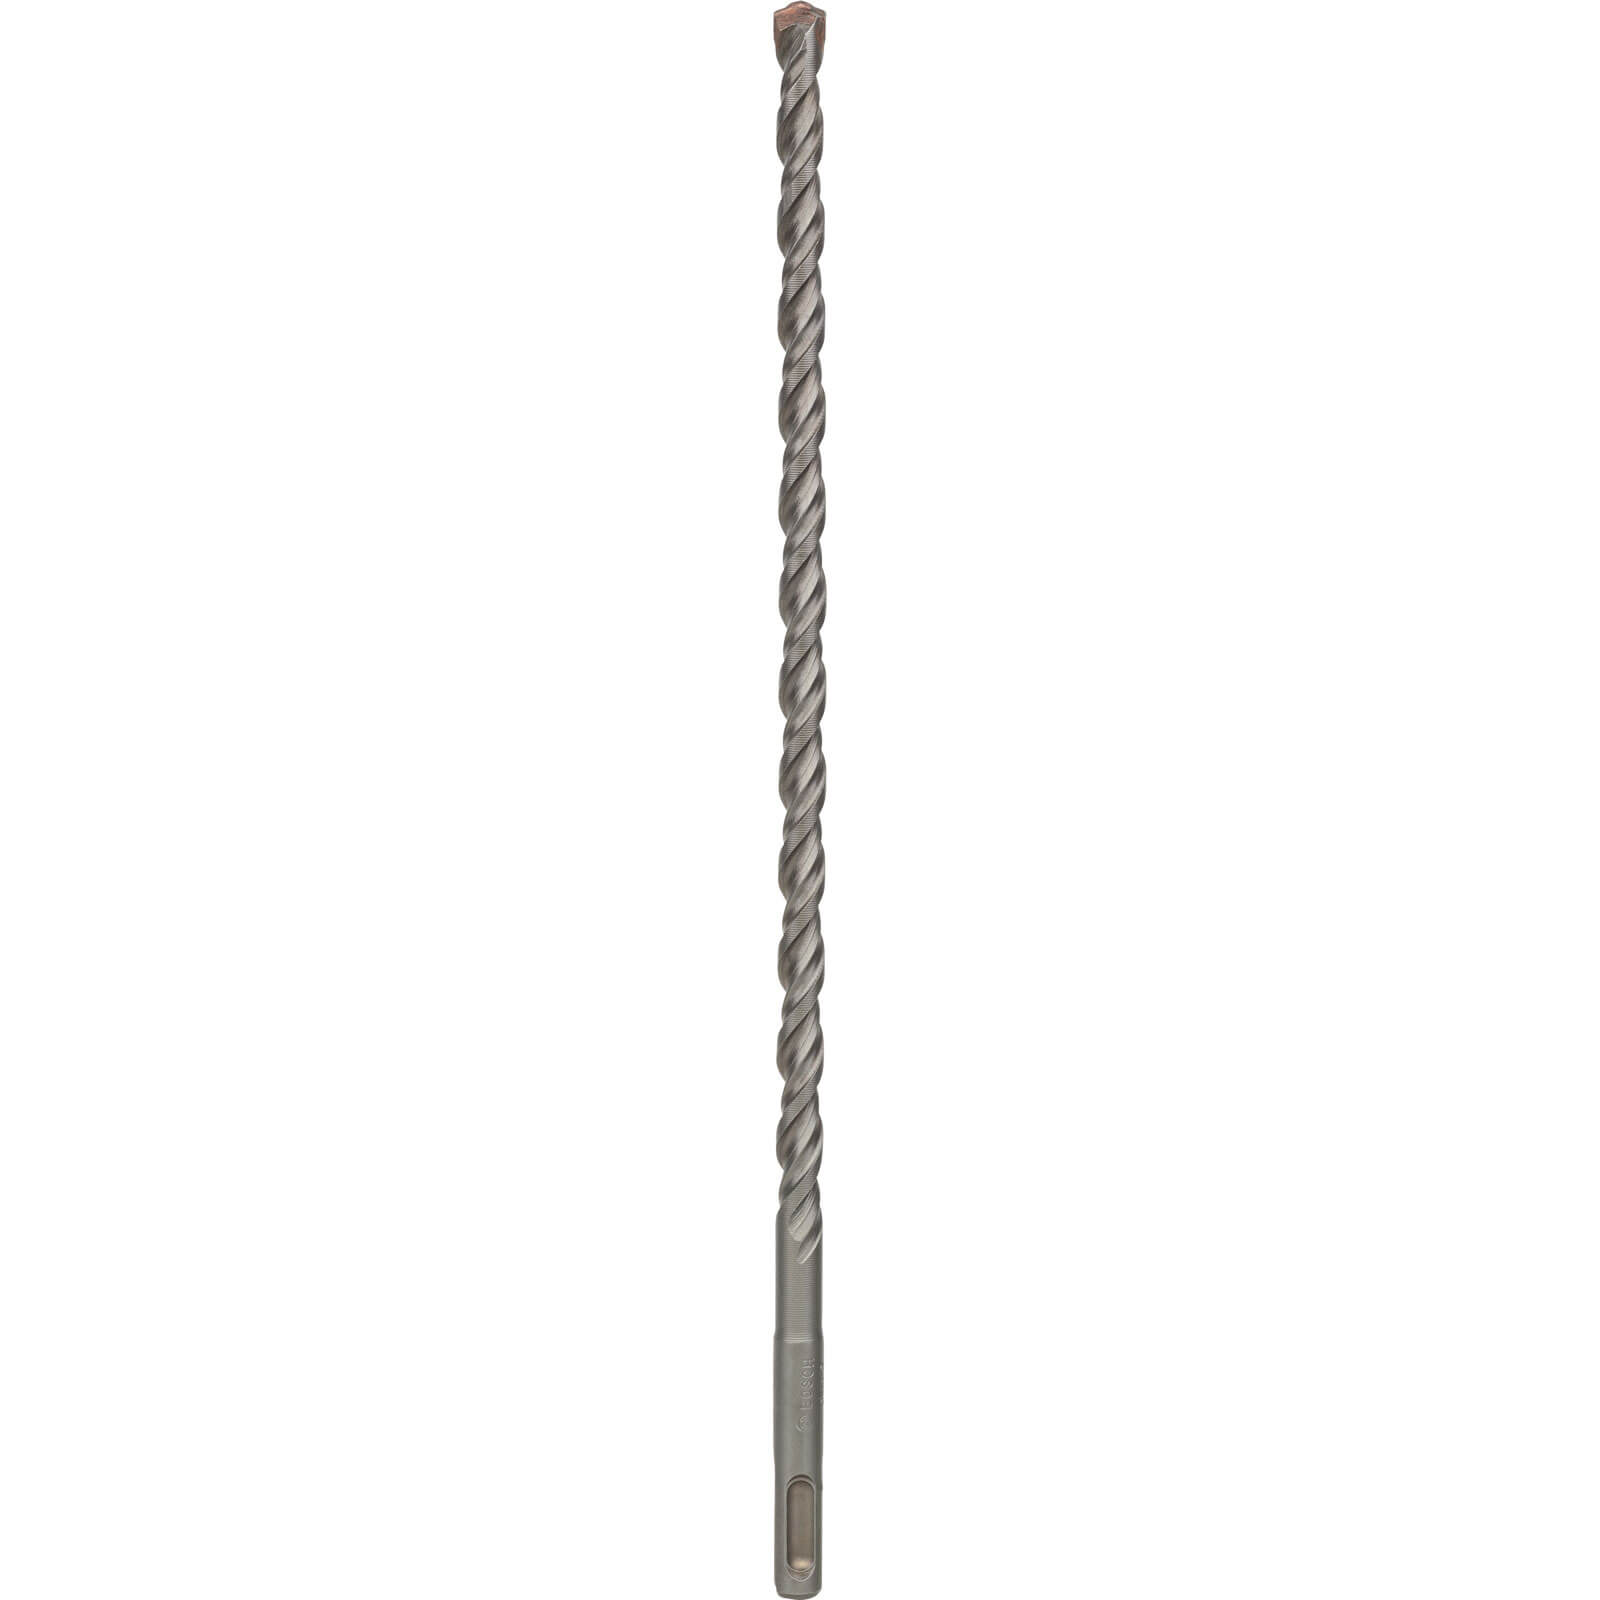 Image of Bosch Series 3 SDS Plus Masonry Drill Bit 10mm 310mm Pack of 1